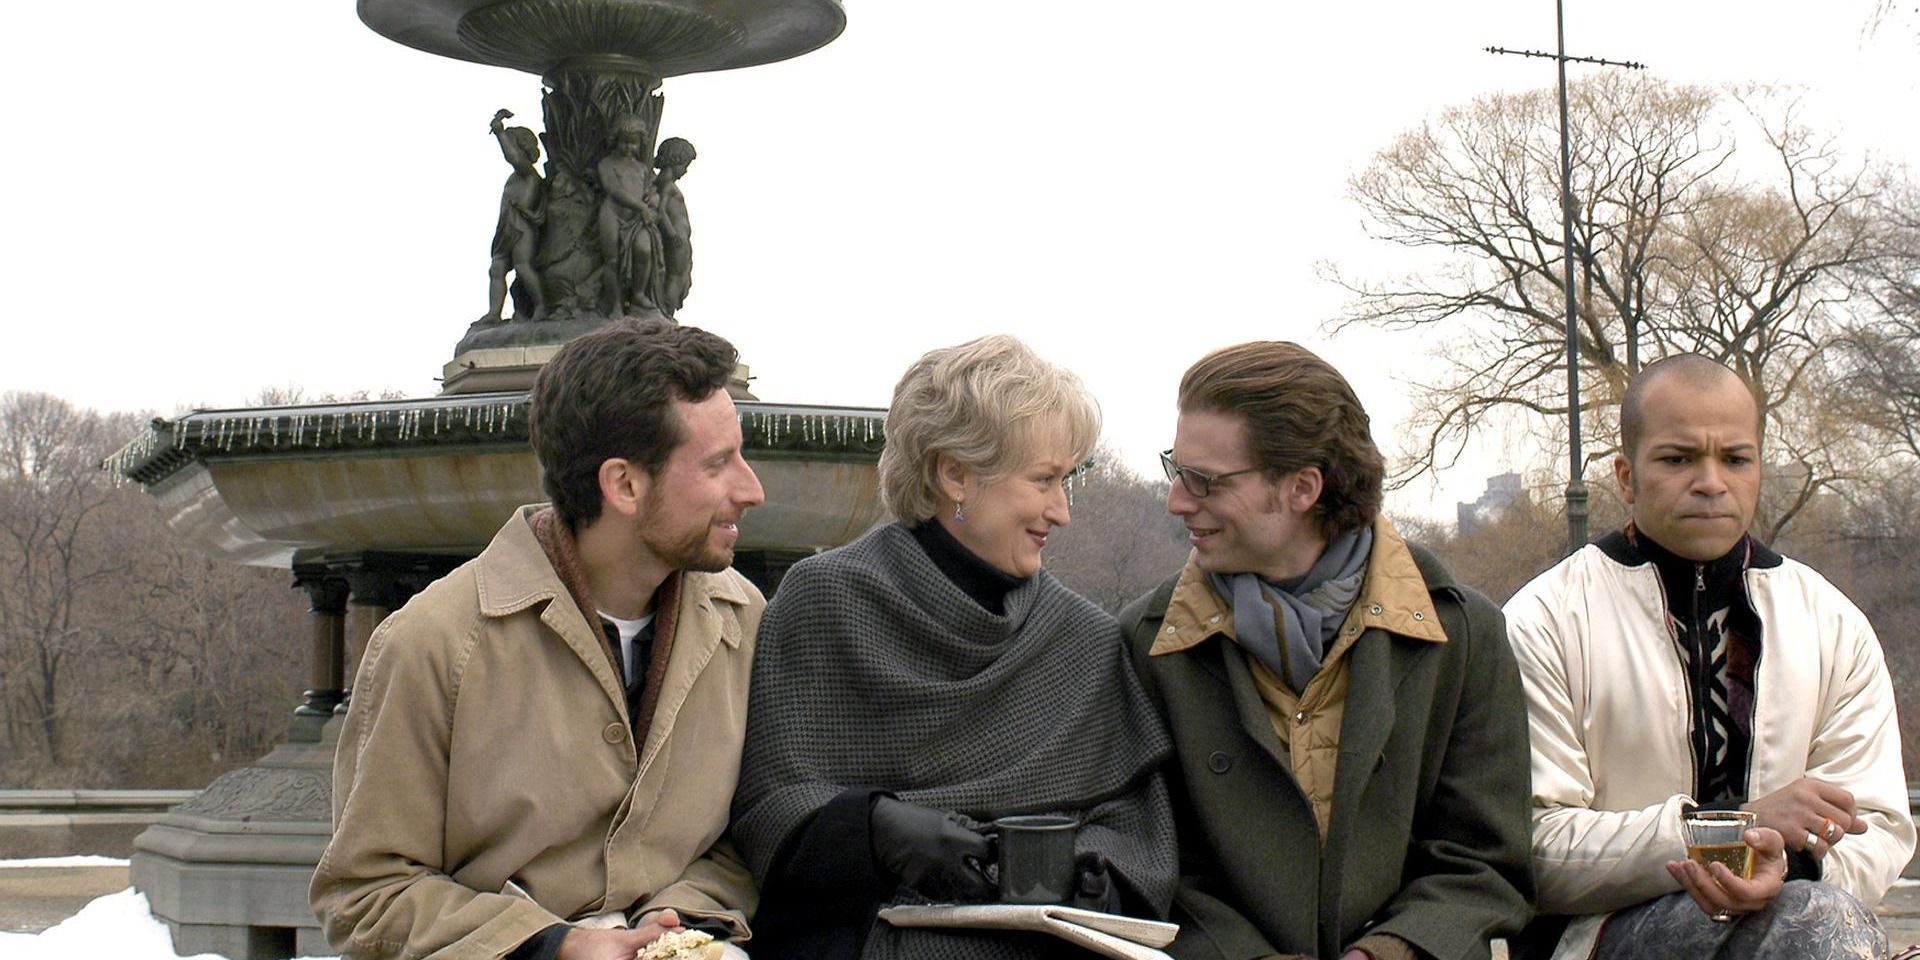 Three men talking to a woman in front of a fountain in 